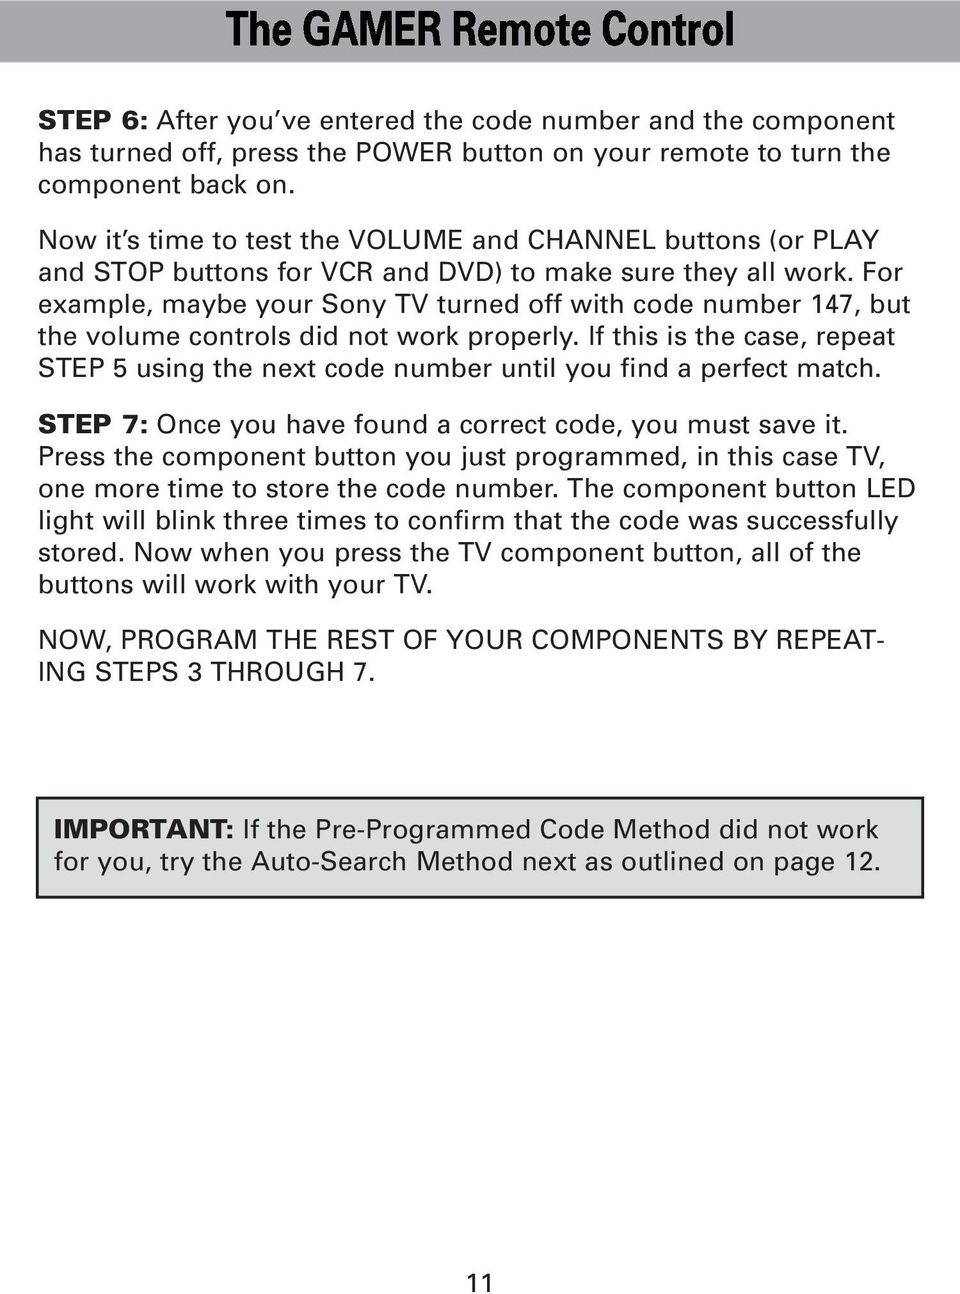 For example, maybe your Sony TV turned off with code number 147, but the volume controls did not work properly.